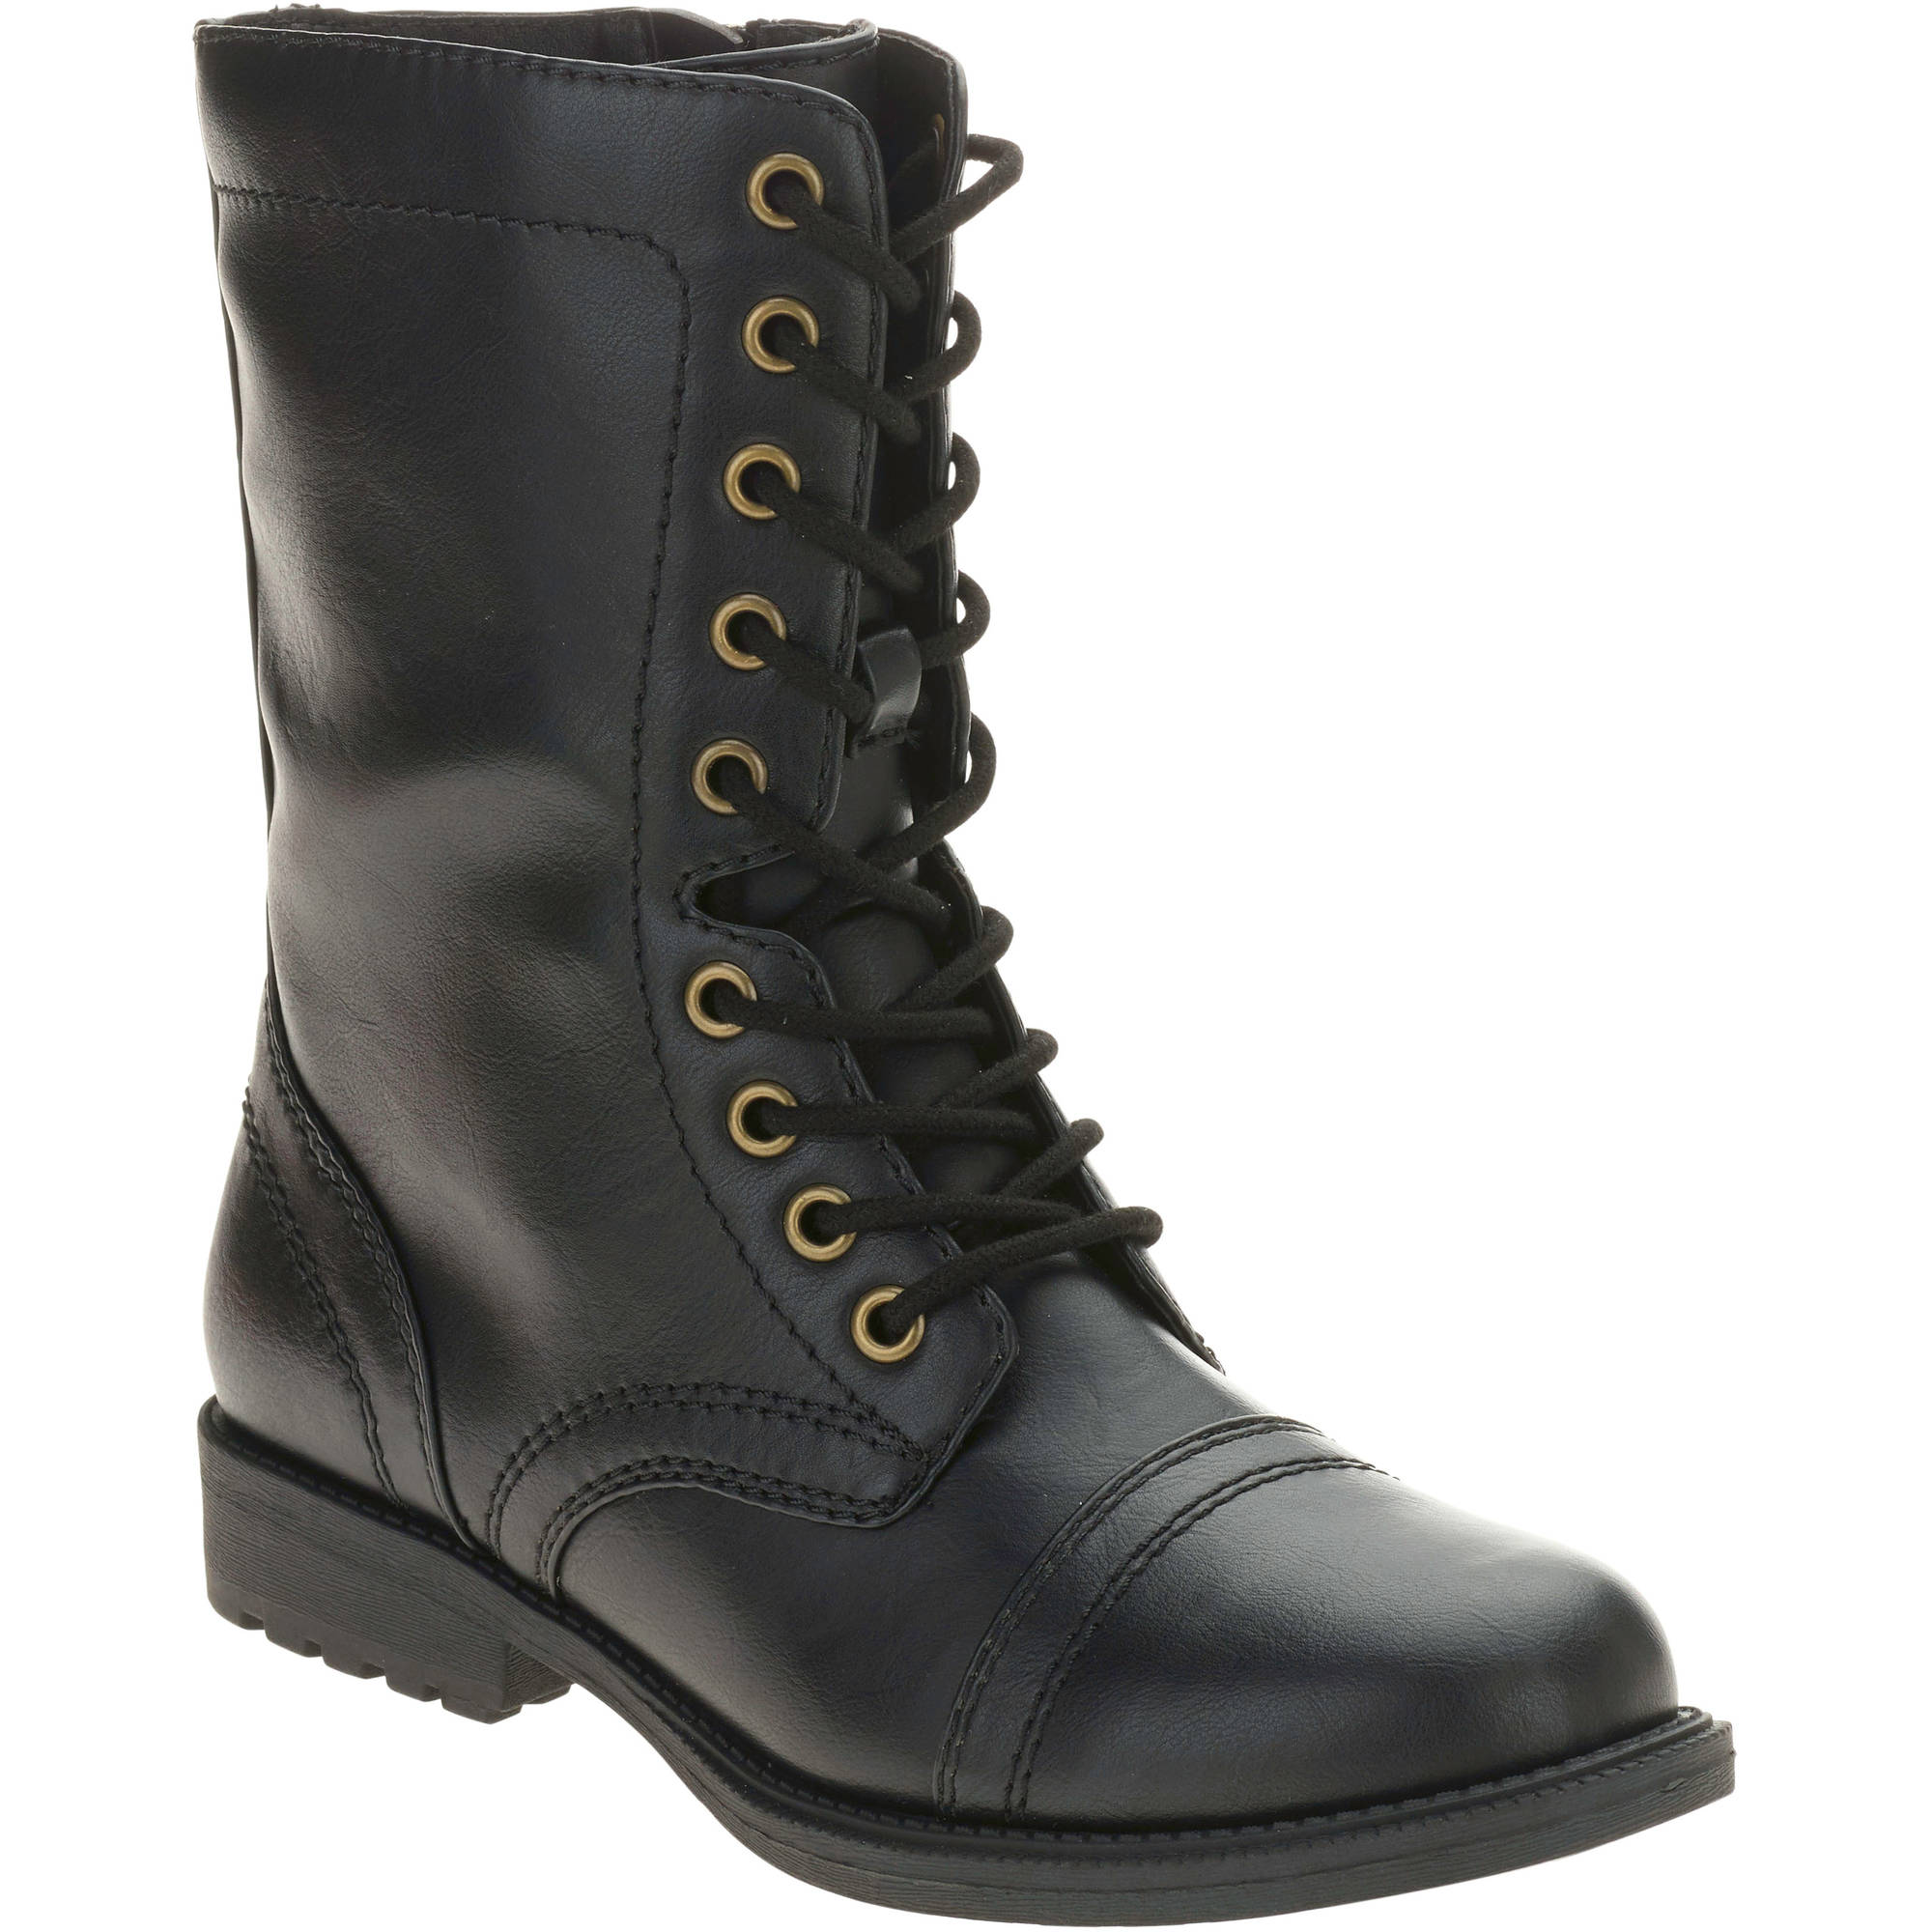 combat boots image is loading combat-boots-women-up-lace-military-shoes-high- XXOTQND